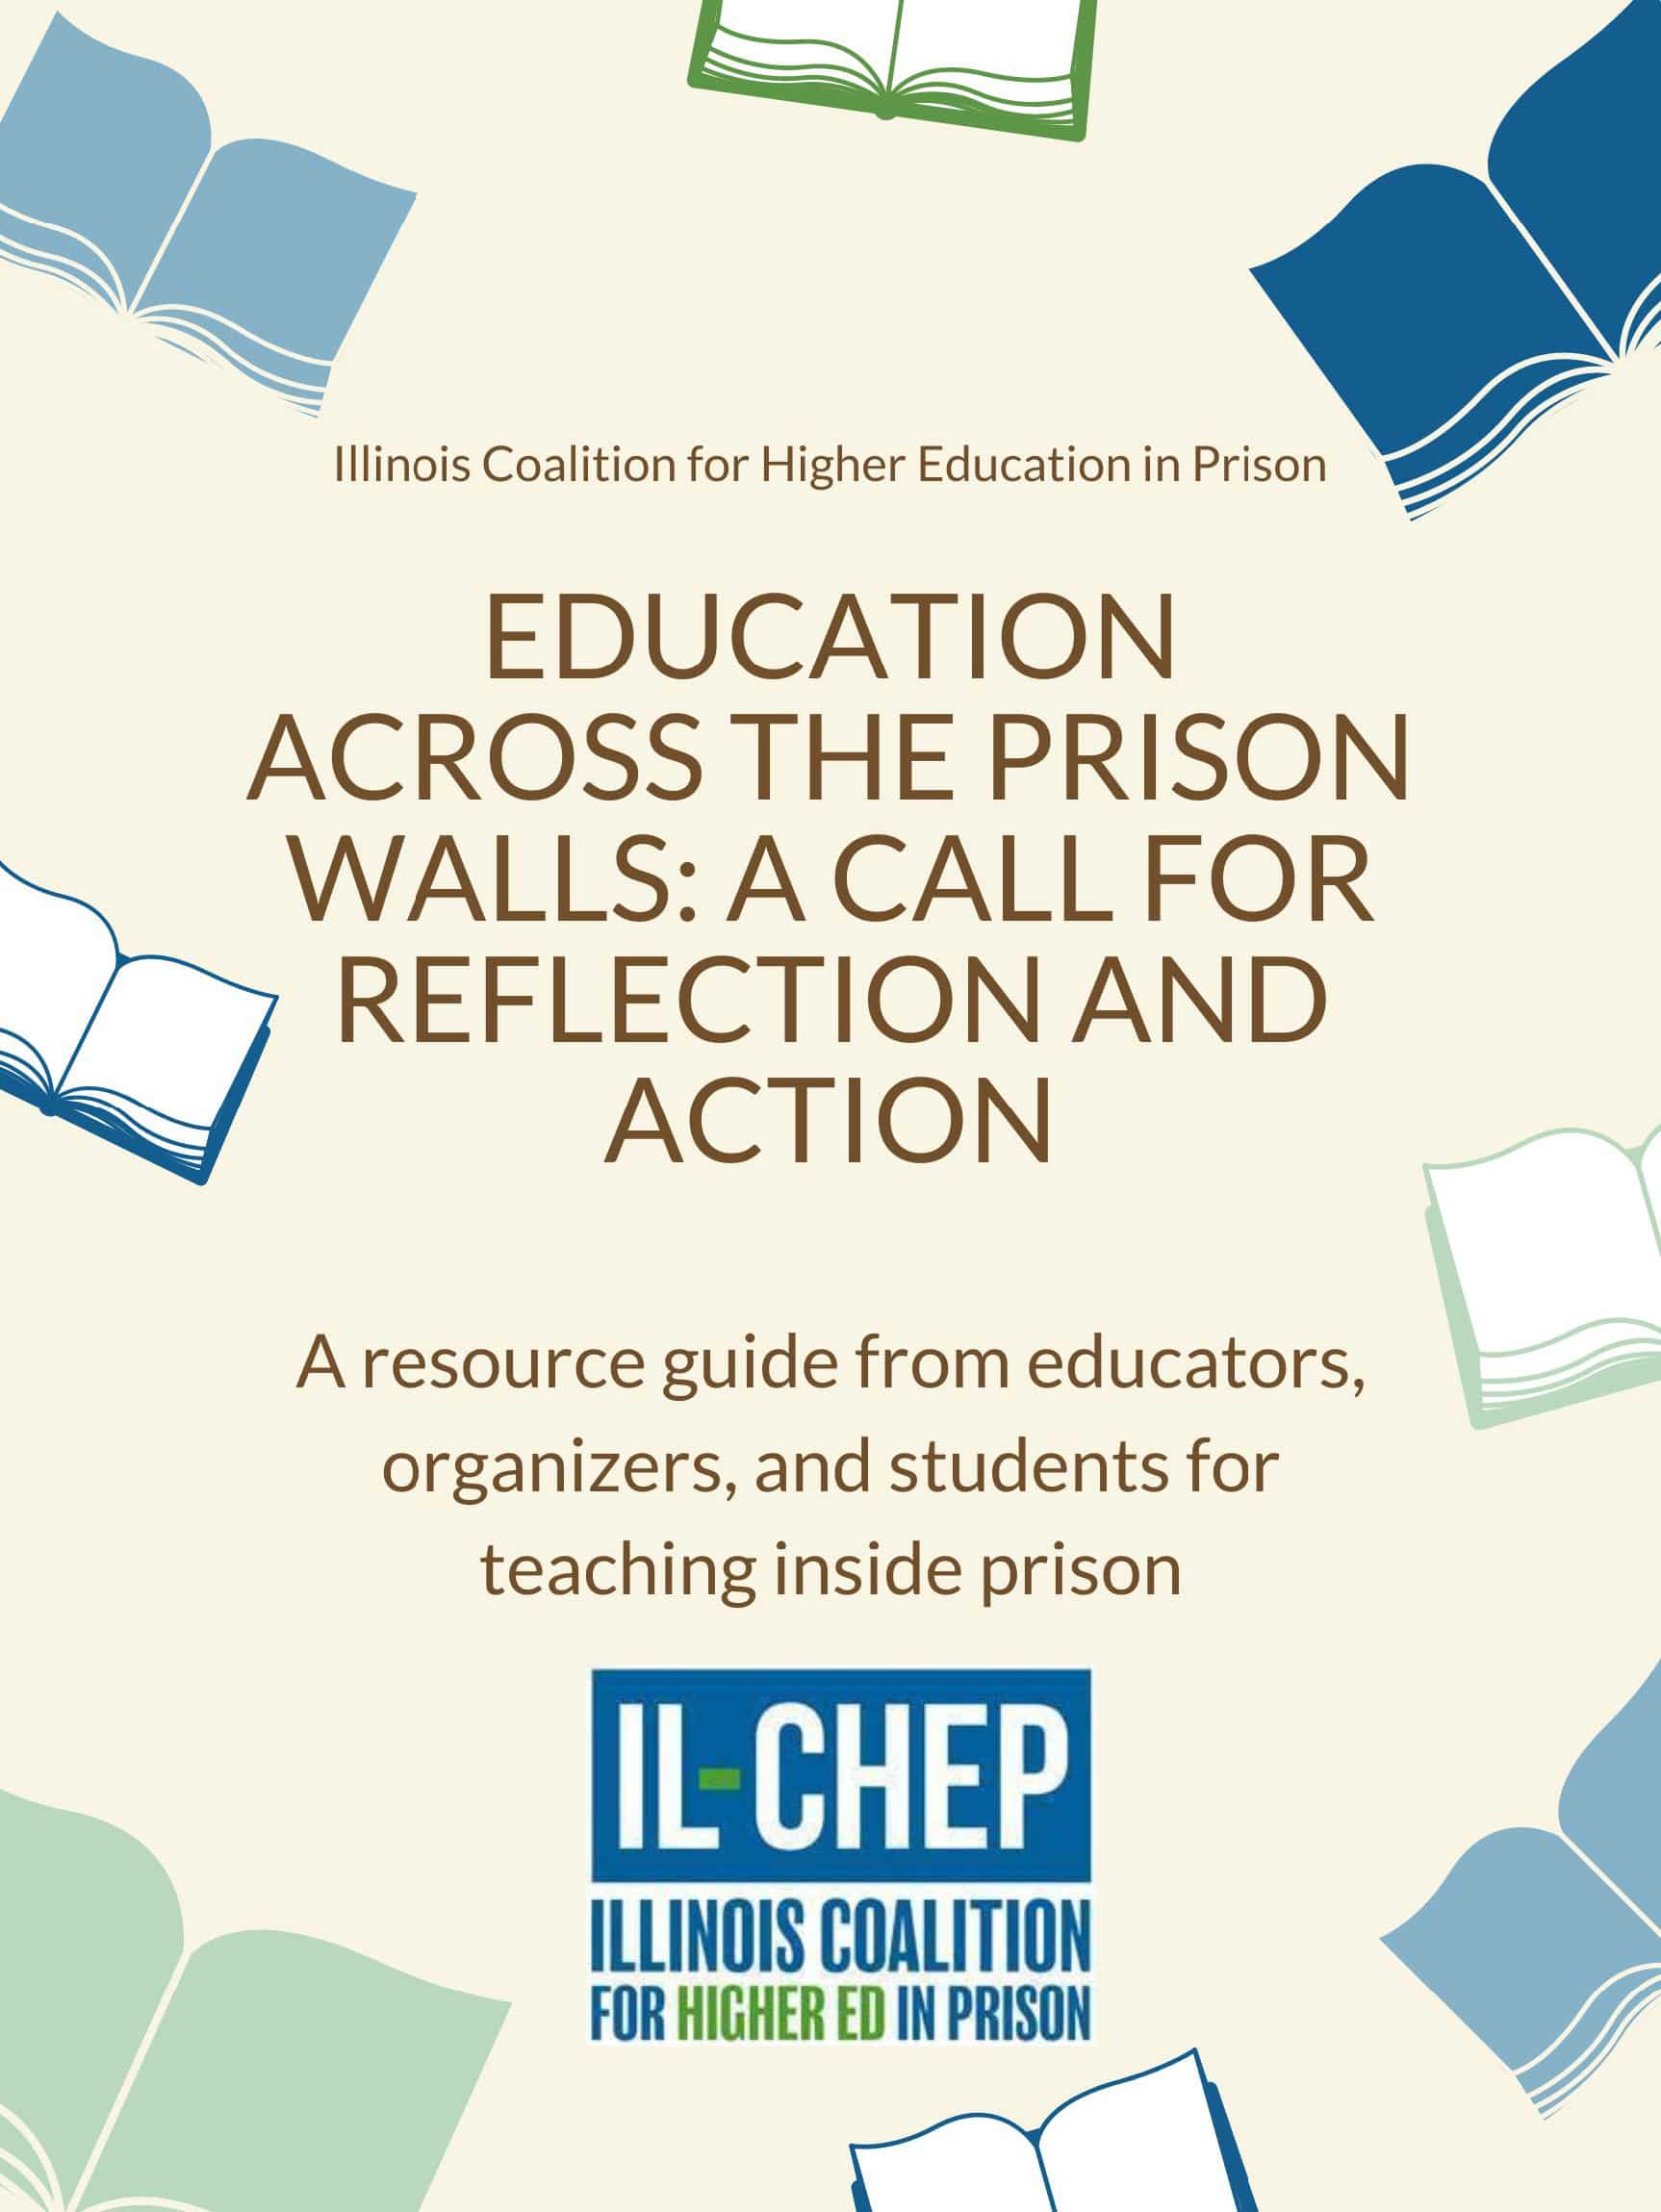 Education Across the Prison Walls 2021 Resource Guide